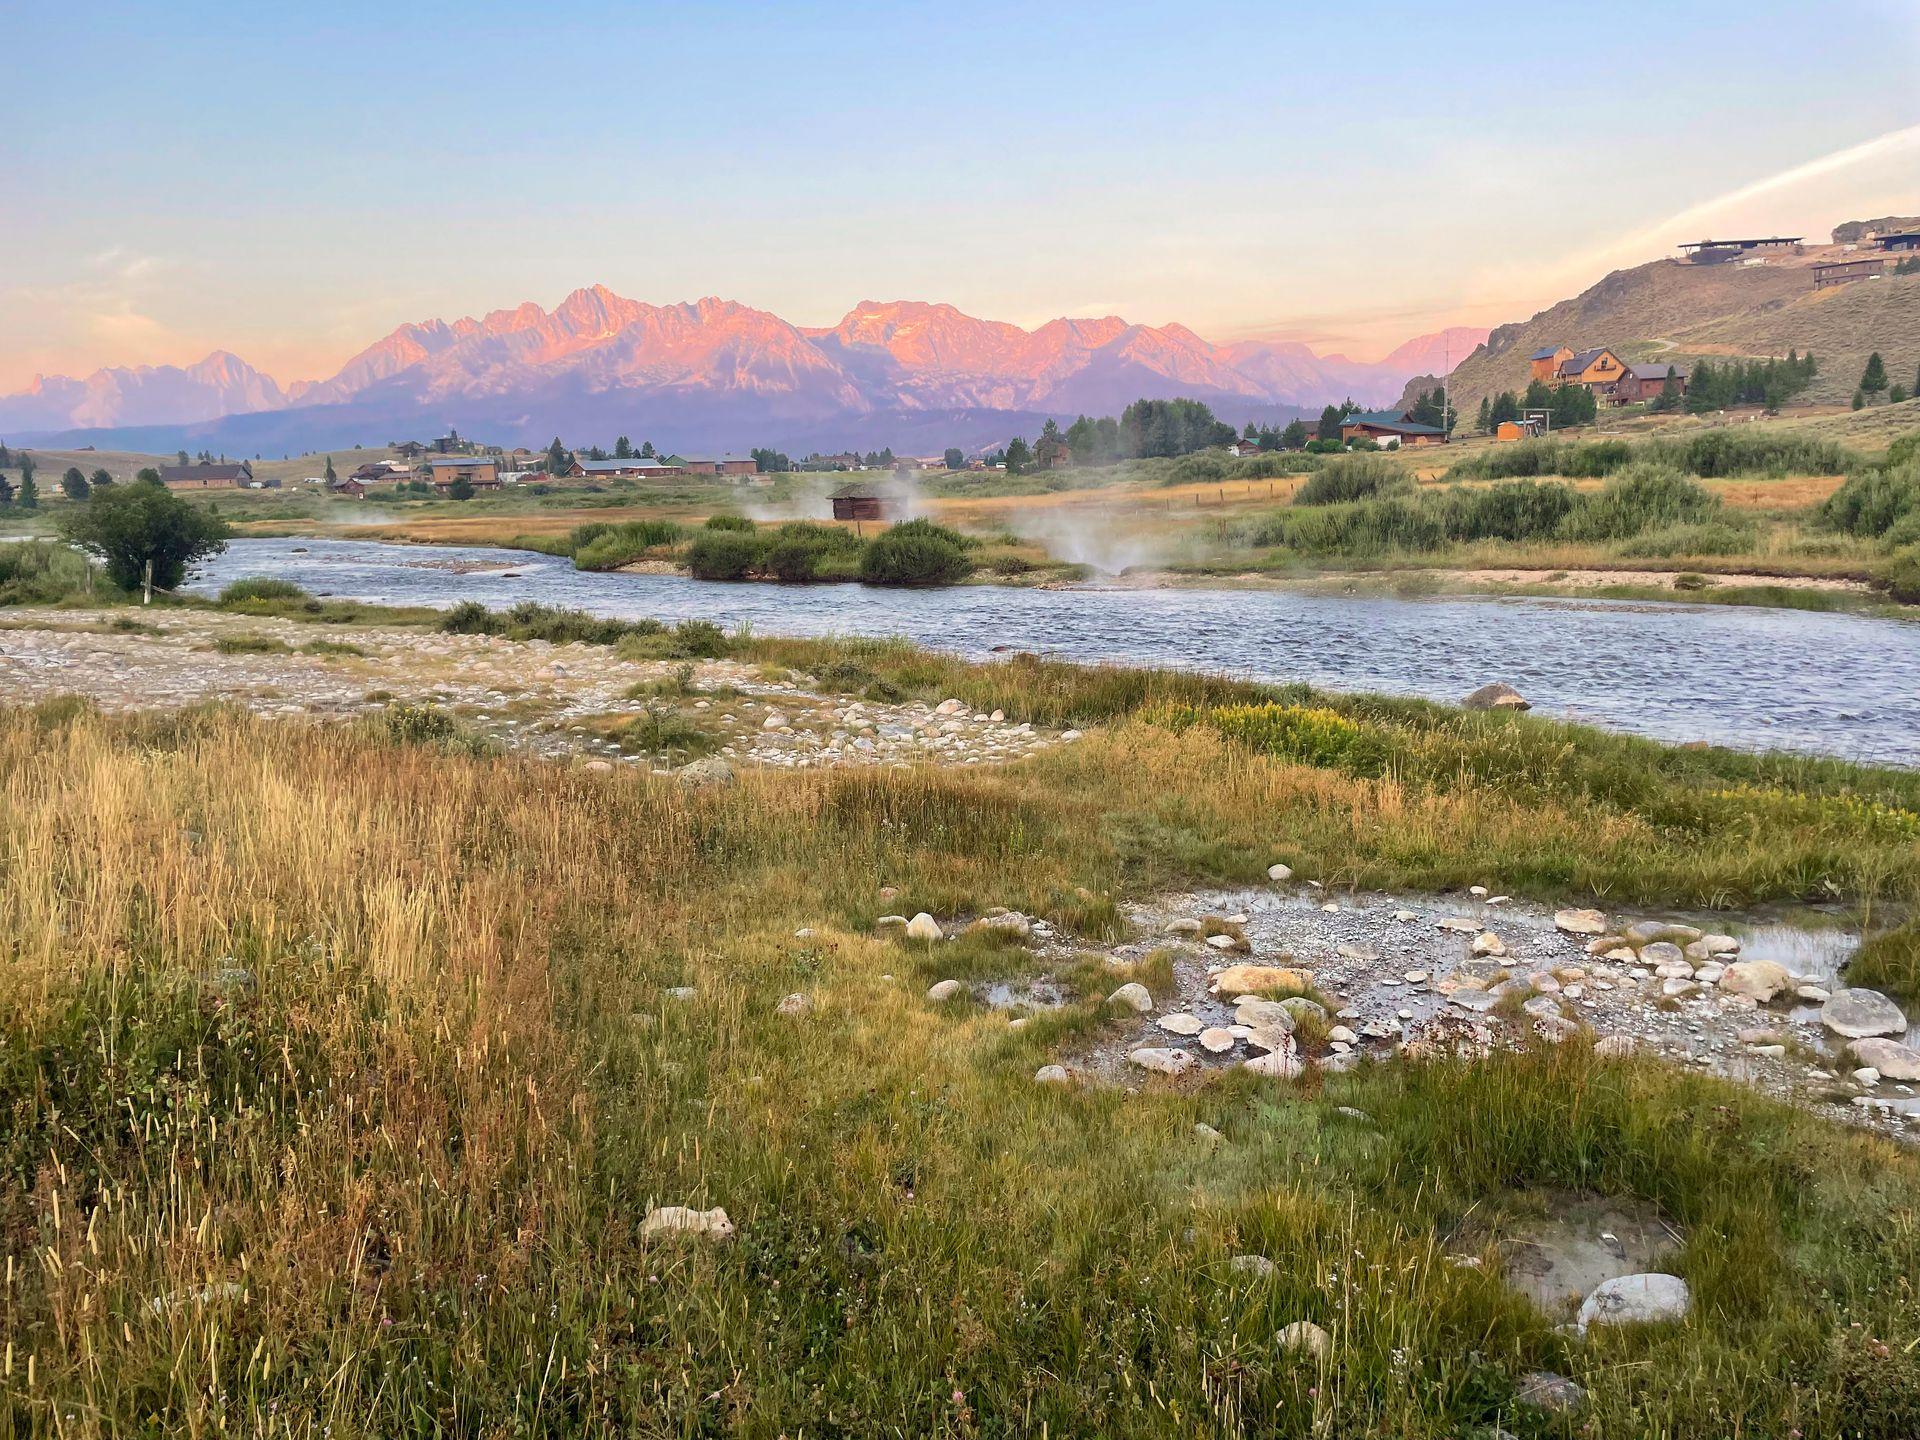 Looking out at the river and mountains from Valley Creek Hot Springs at sunrise.